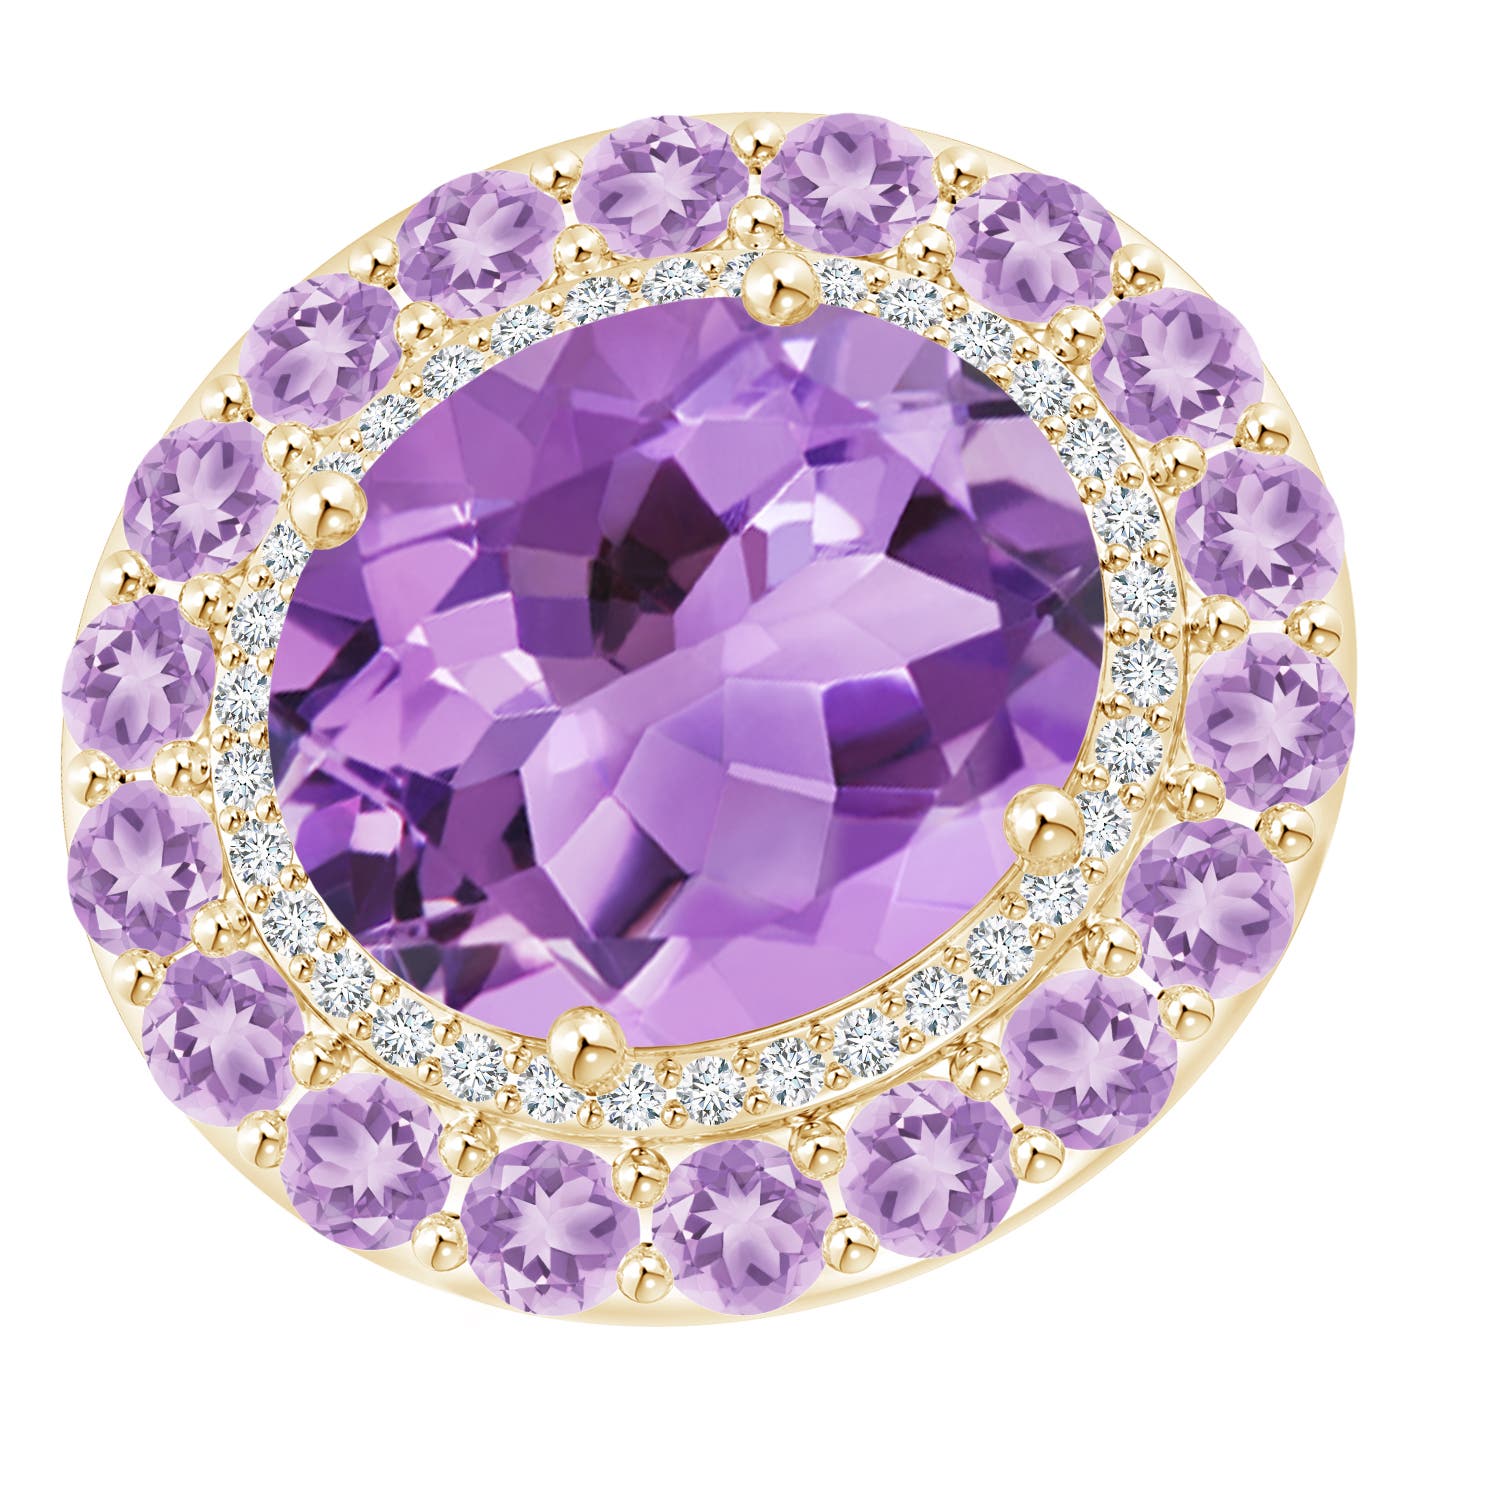 A - Amethyst / 8.52 CT / 14 KT Yellow Gold